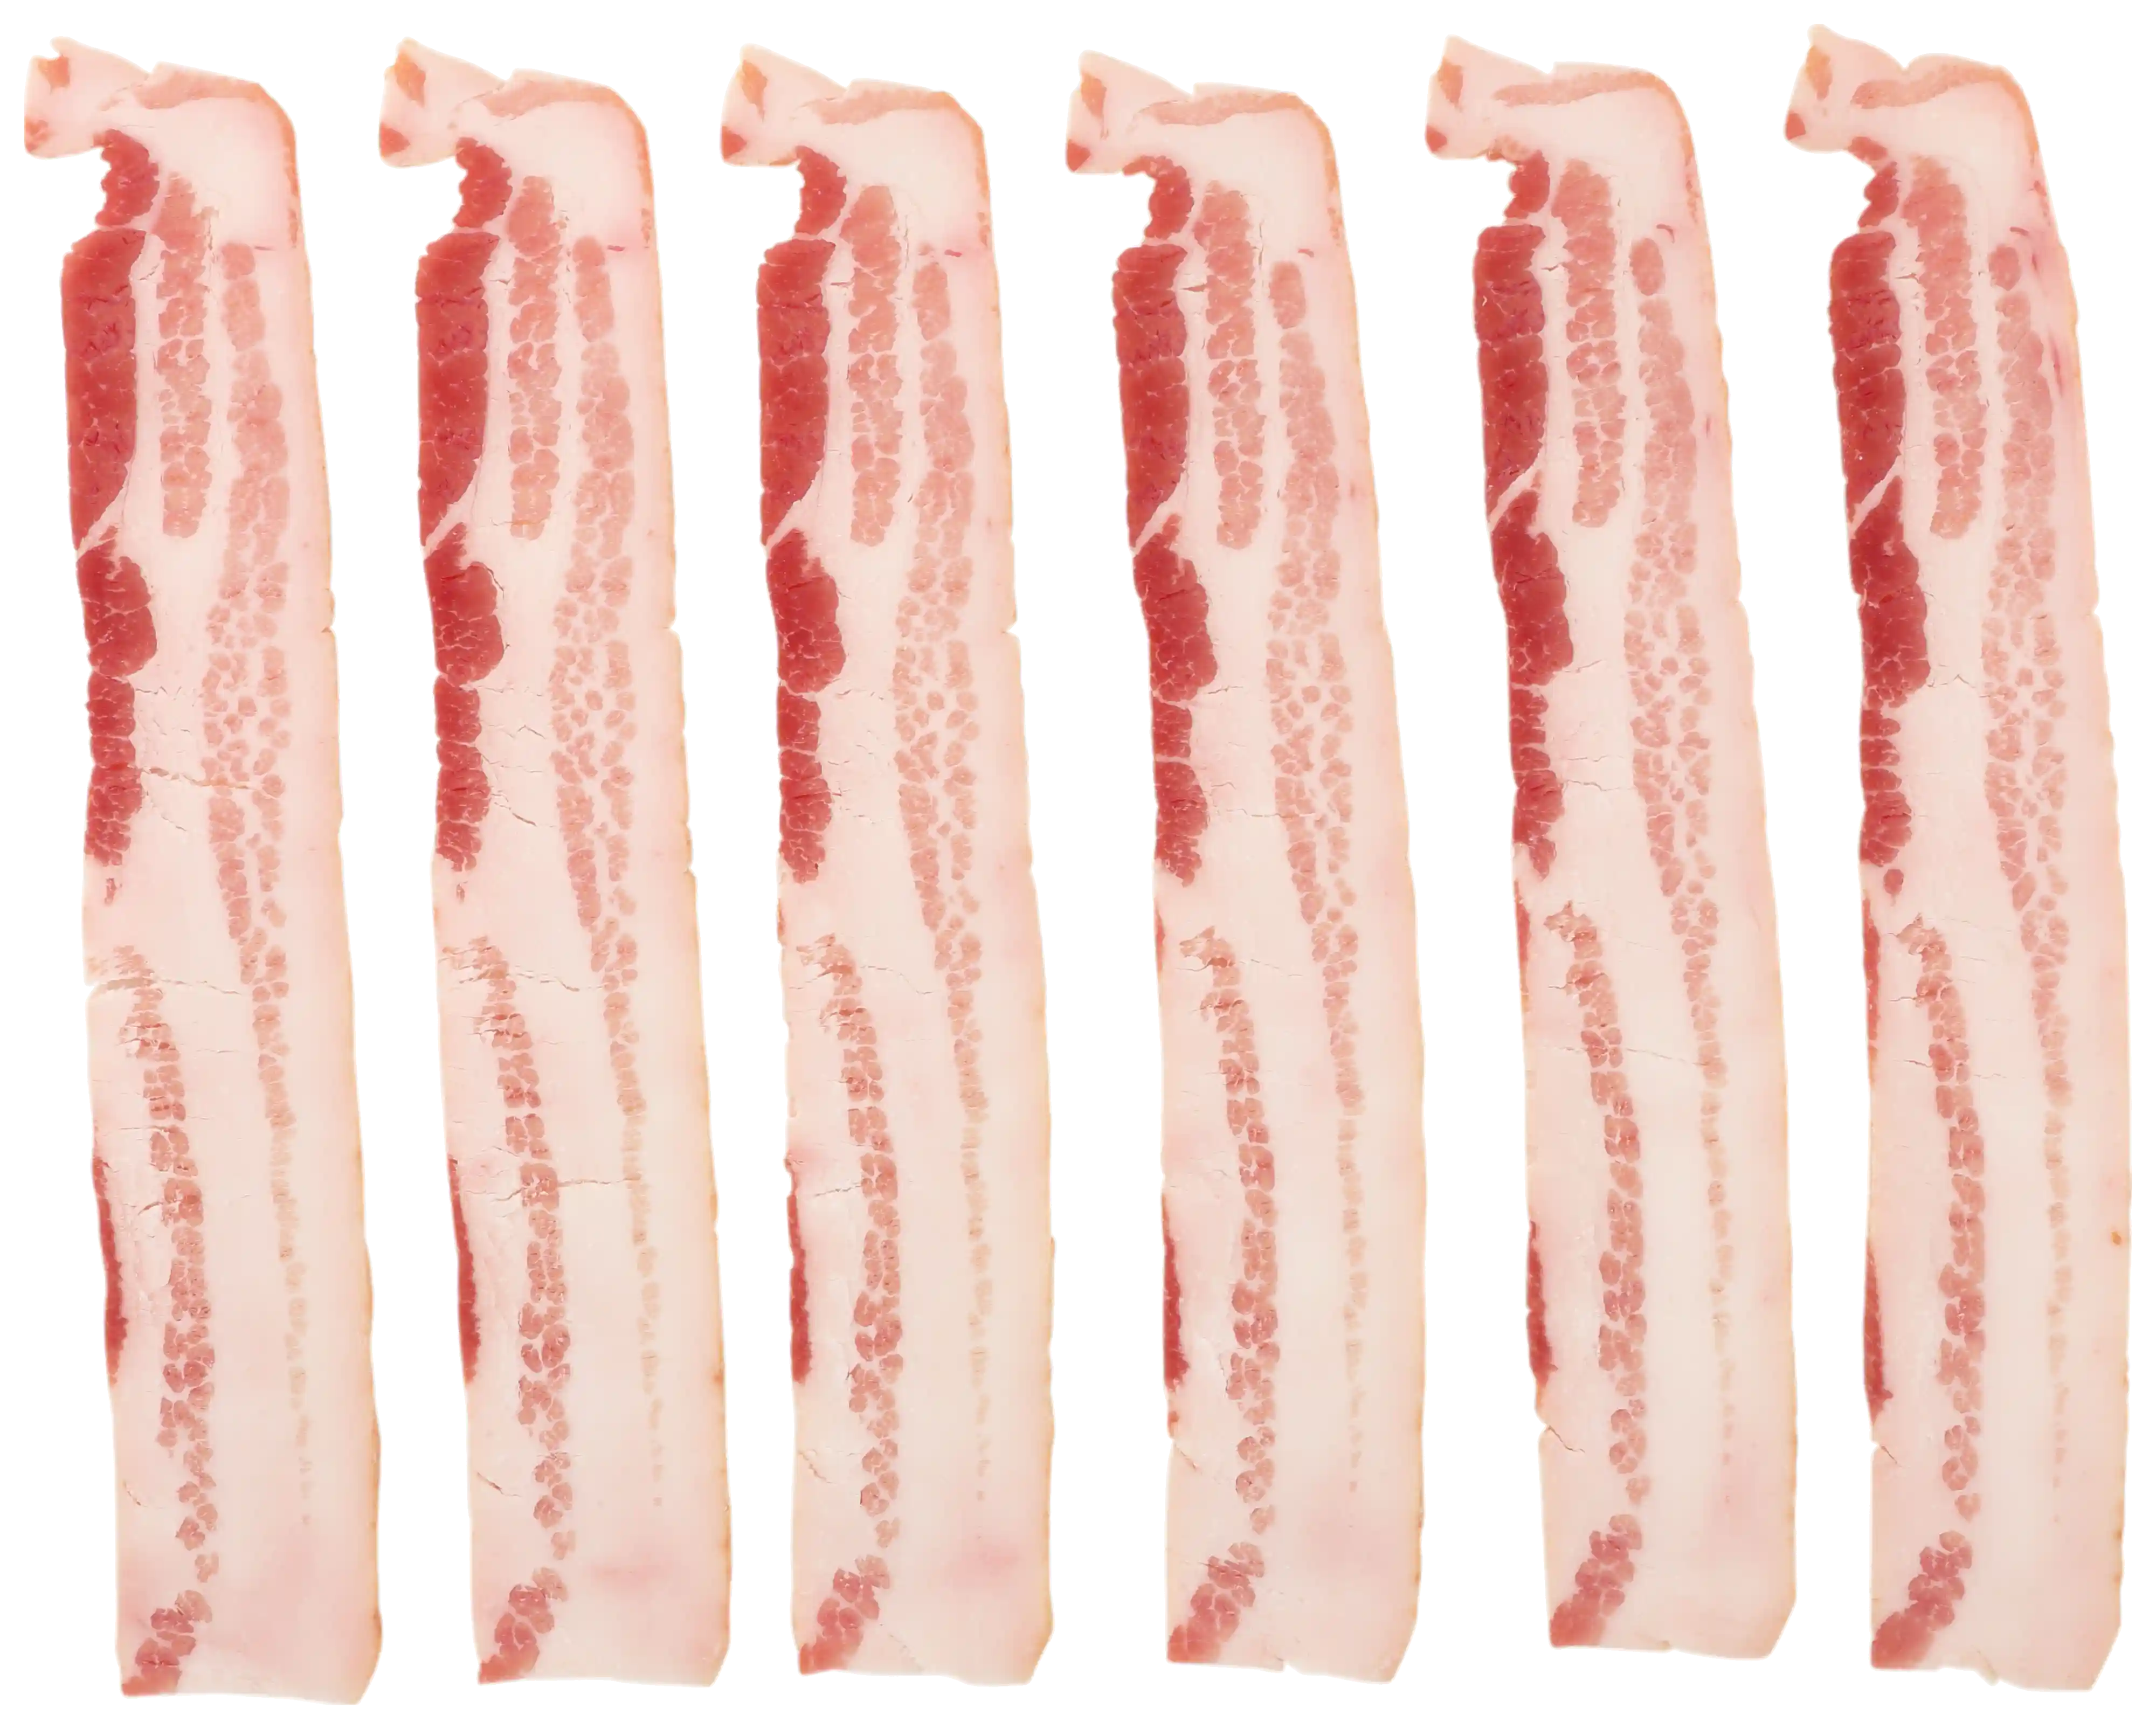 Wright® Brand Naturally Hickory Smoked Thick Sliced Bacon, Bulk, 15 Lbs, 10-14 Slices Per Pound, Gas Flushed_image_21